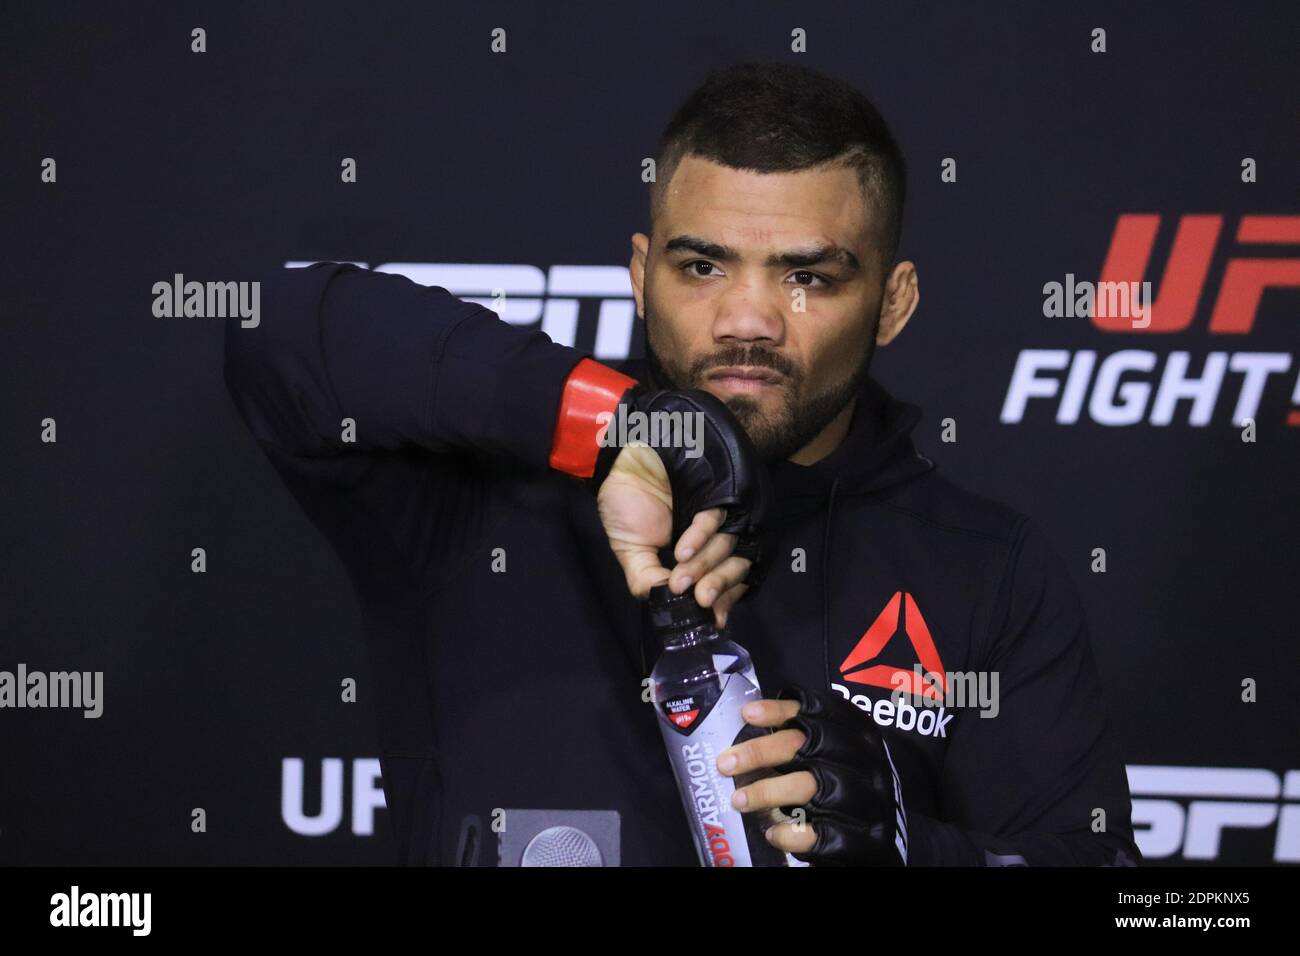 December 19, 2020: Las Vegas, NV - December 19: Deron Winn interacts with media after the UFC Vegas 17 event at UFC Apex on December 19, 2020 in Las Vegas, Nevada, United States. Credit: Diego Ribas/PX Imagens/ZUMA Wire/Alamy Live News Stock Photo